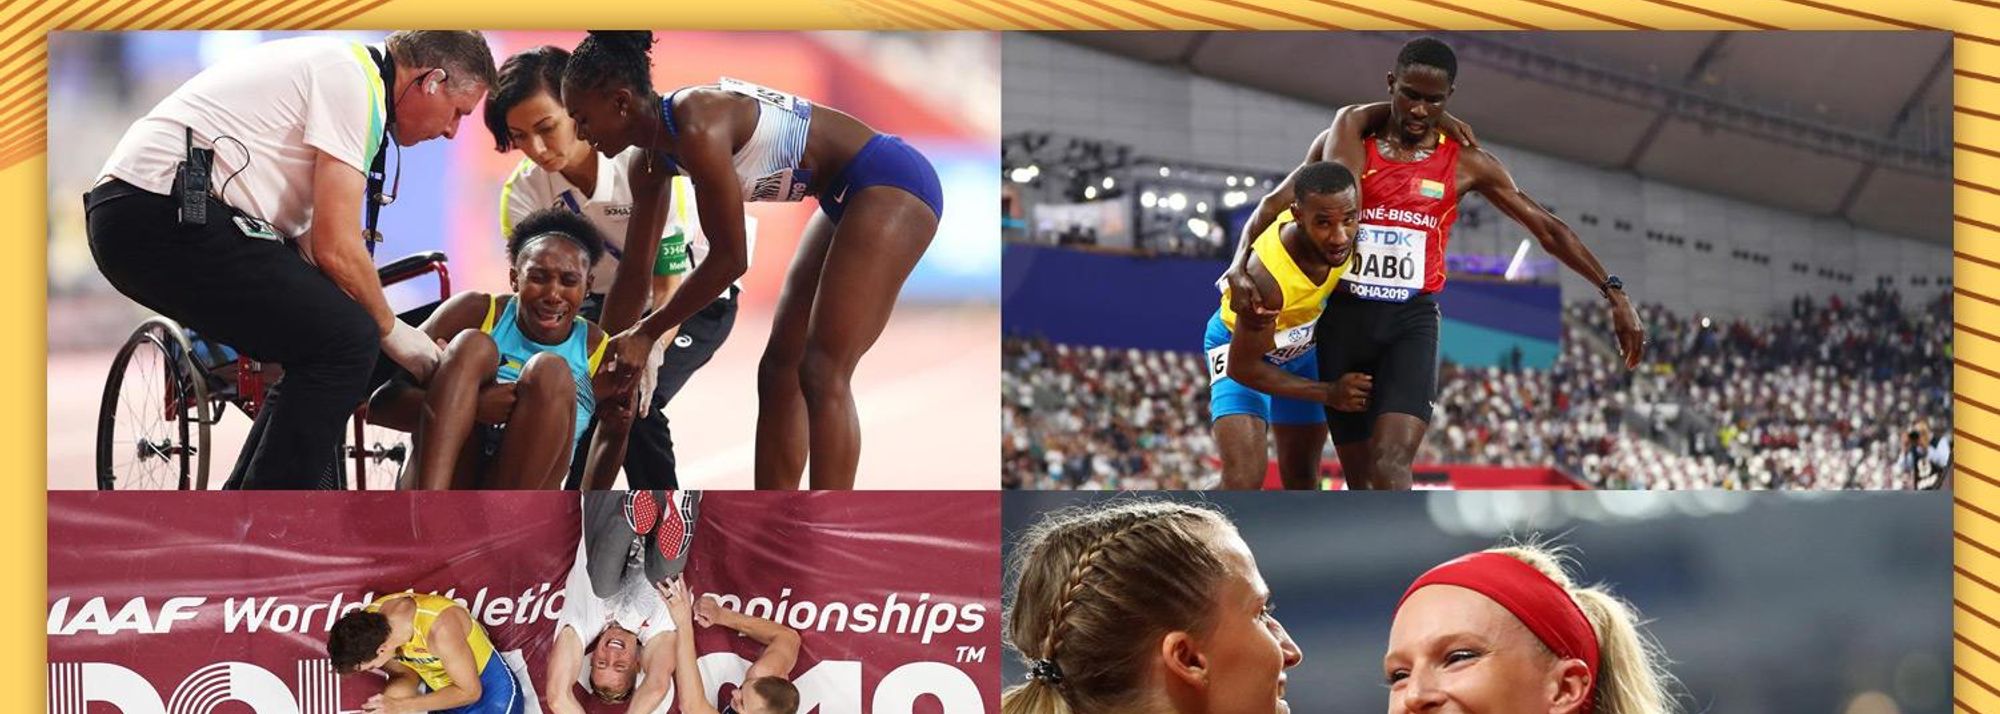 Following the conclusion of the IAAF World Athletics Championships Doha 2019, four moments have been shortlisted for the International Fair Play award.